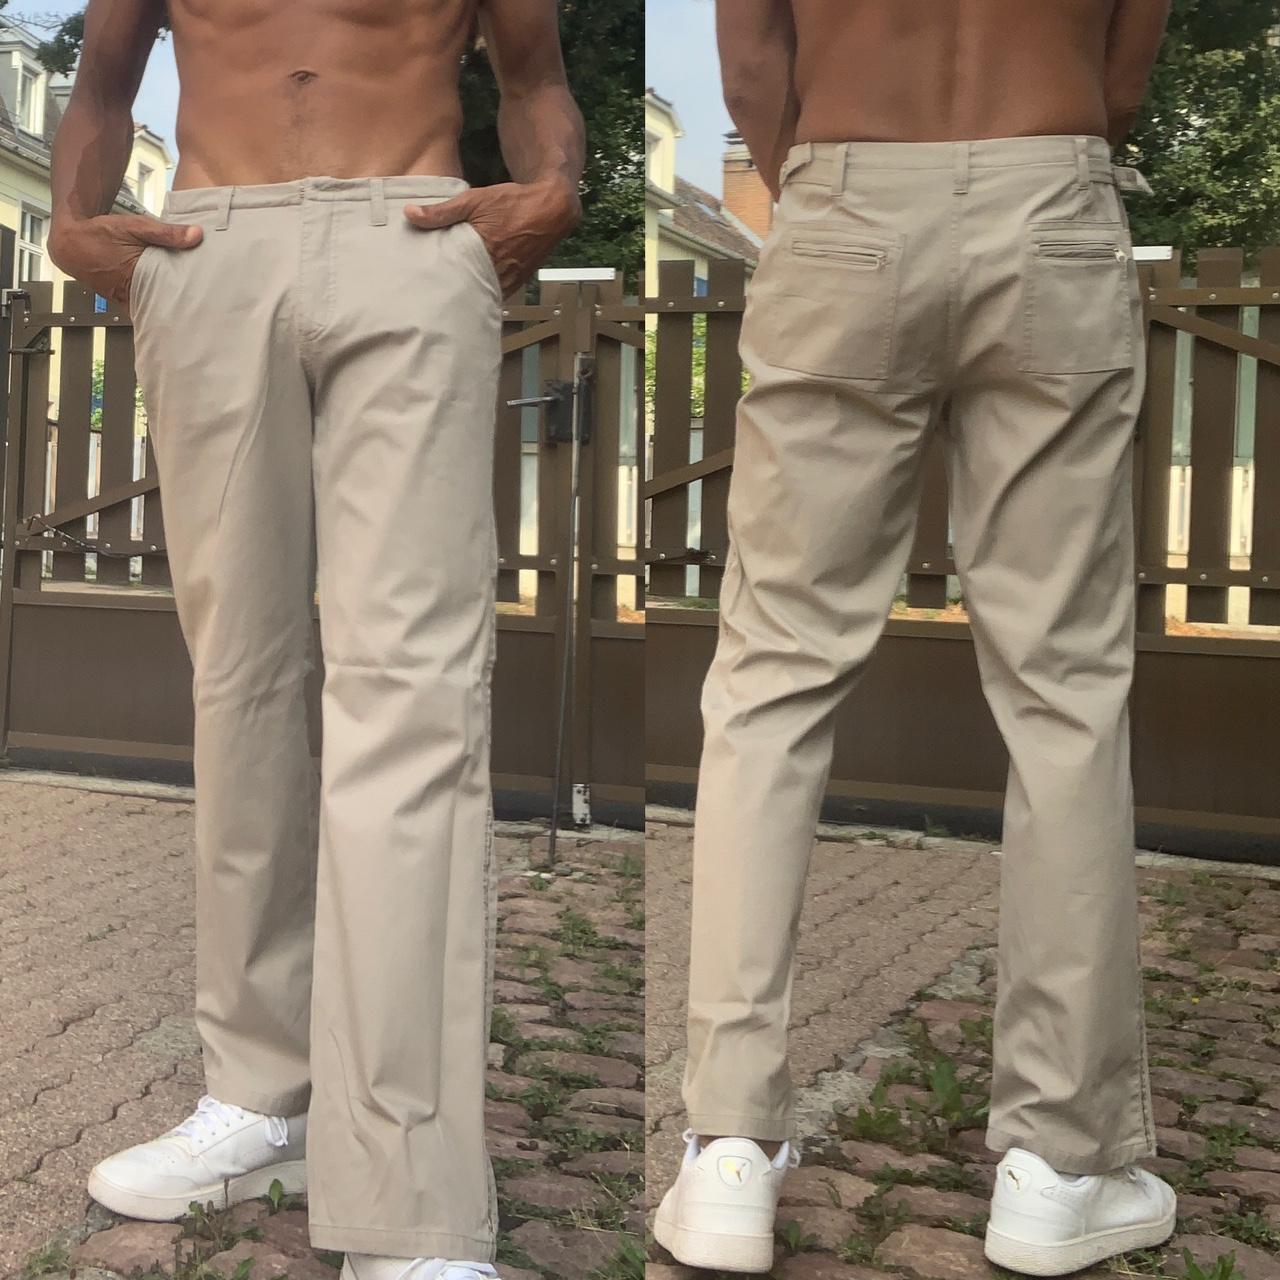 Product Image 1 - Vintage trousers beige .

WELCOME DEPOP